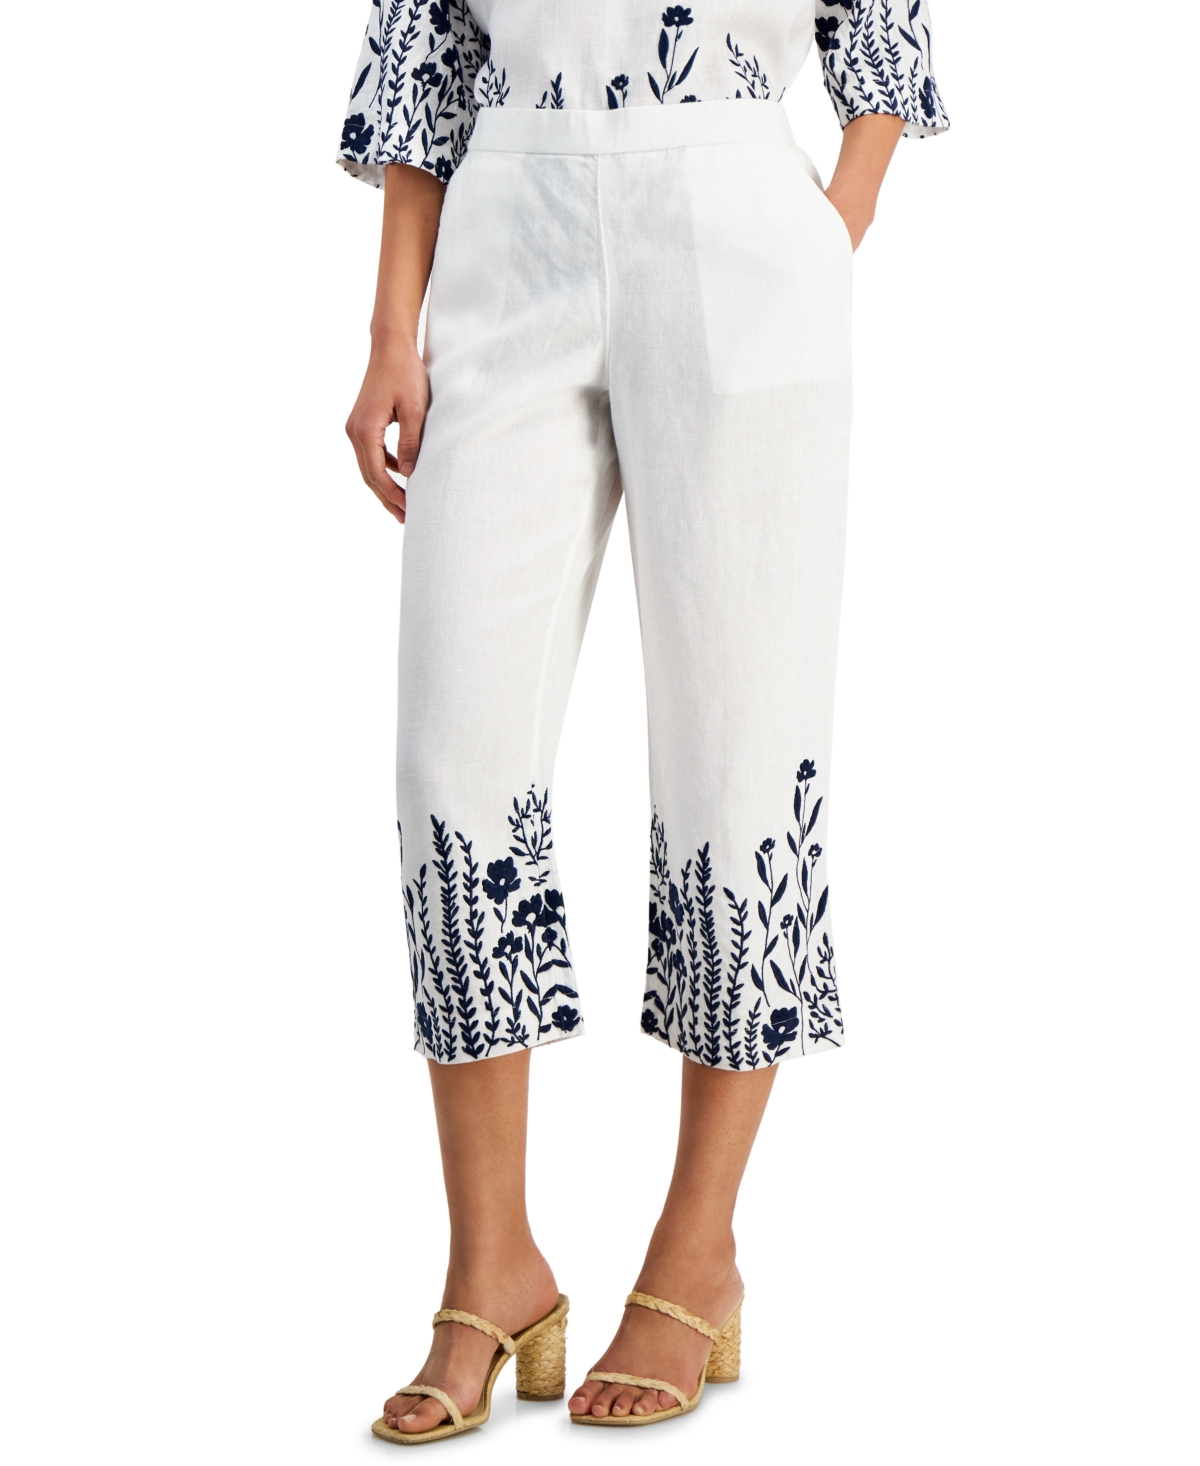 Women's 100% Linen Embroidered Cropped Pants, Created for Macy's - Bright White